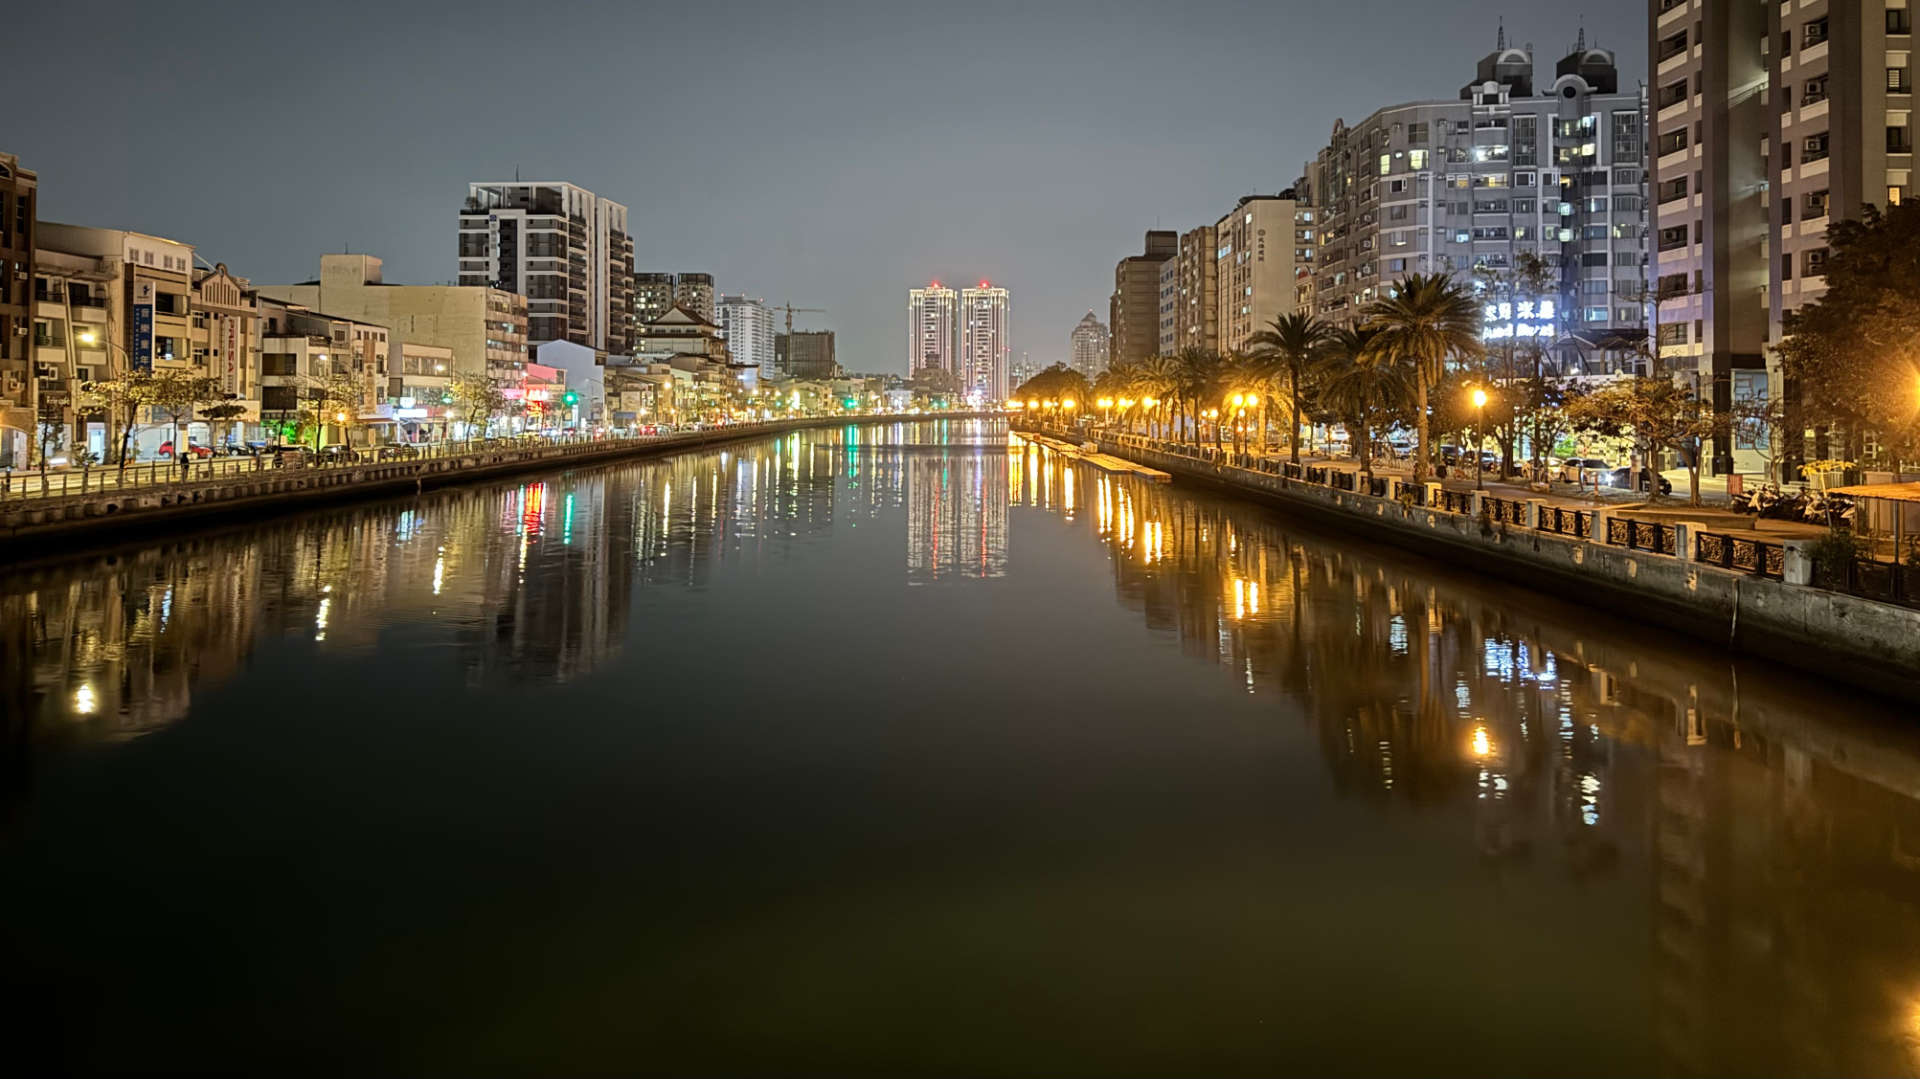 Photo taken from a bridge, looking up Tainan Canal at night. The water is still and reflective.